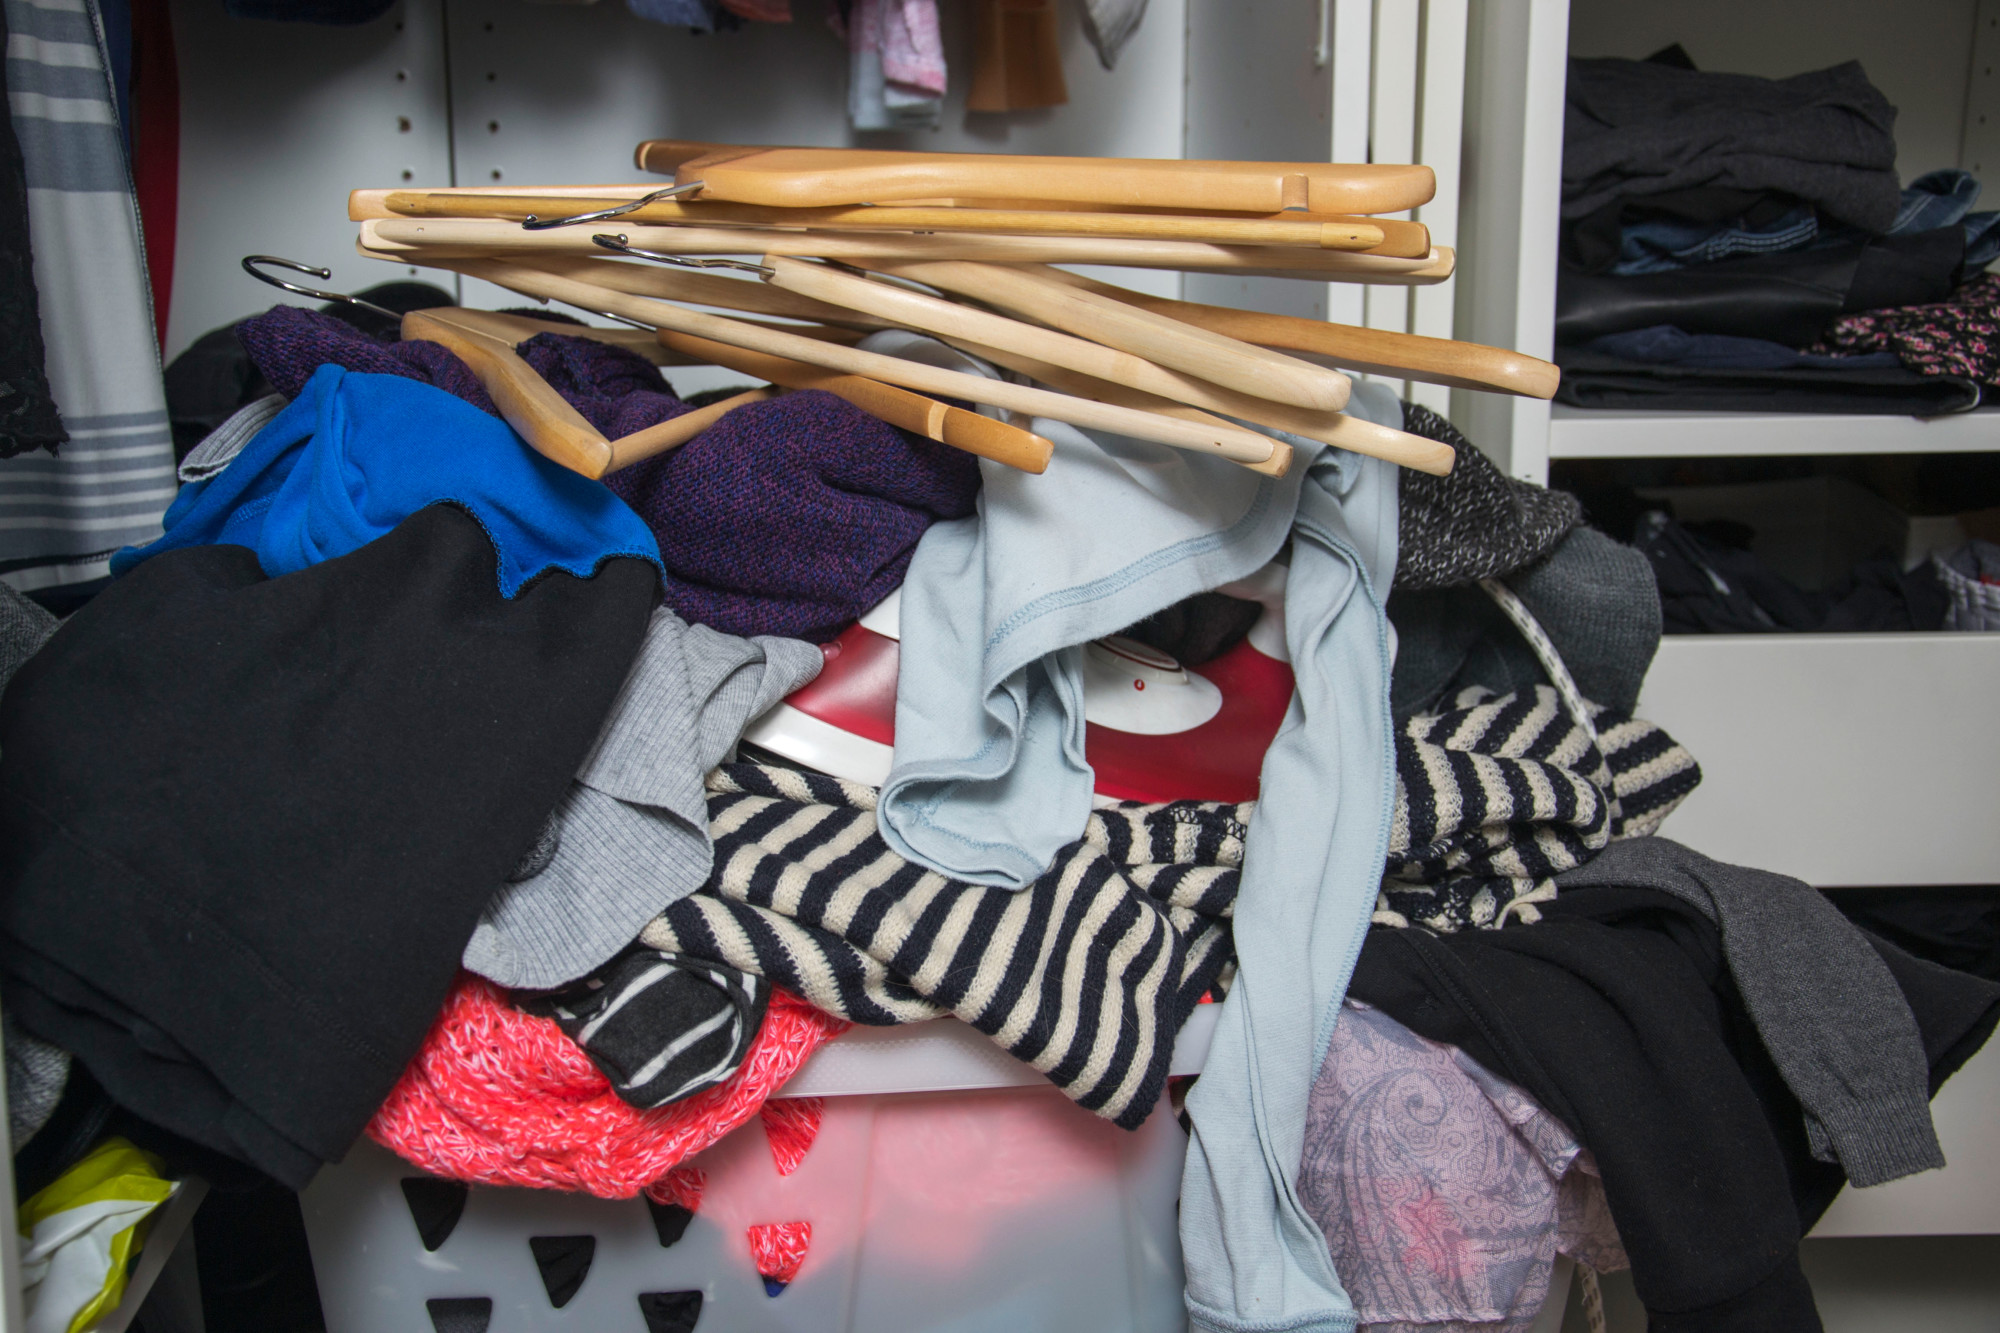 how to clean out a closet